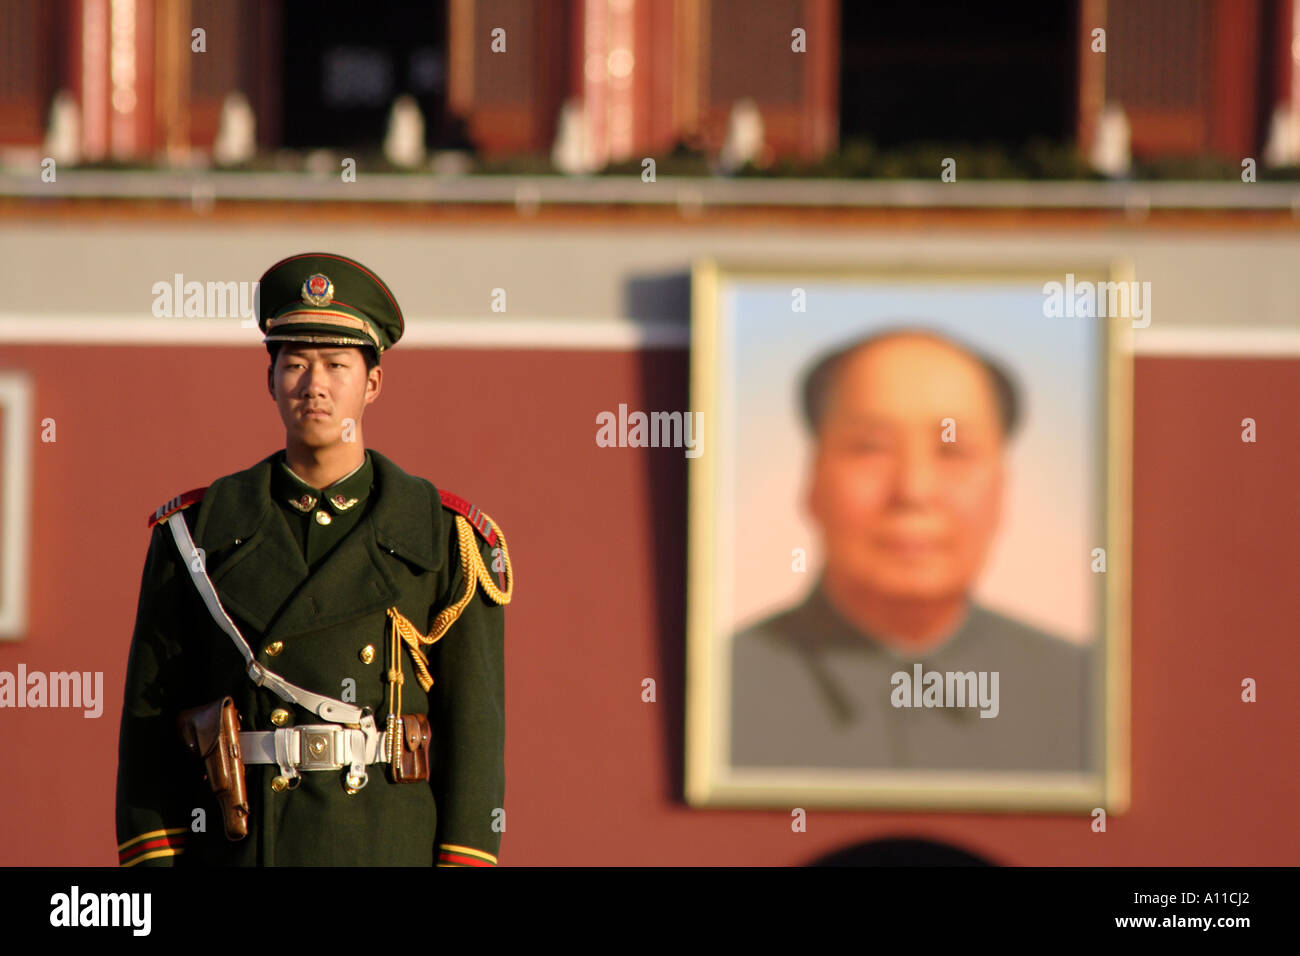 Soldier in front of Mao's portrait, Gate of  Heavenly Peace, Beijing, China Stock Photo